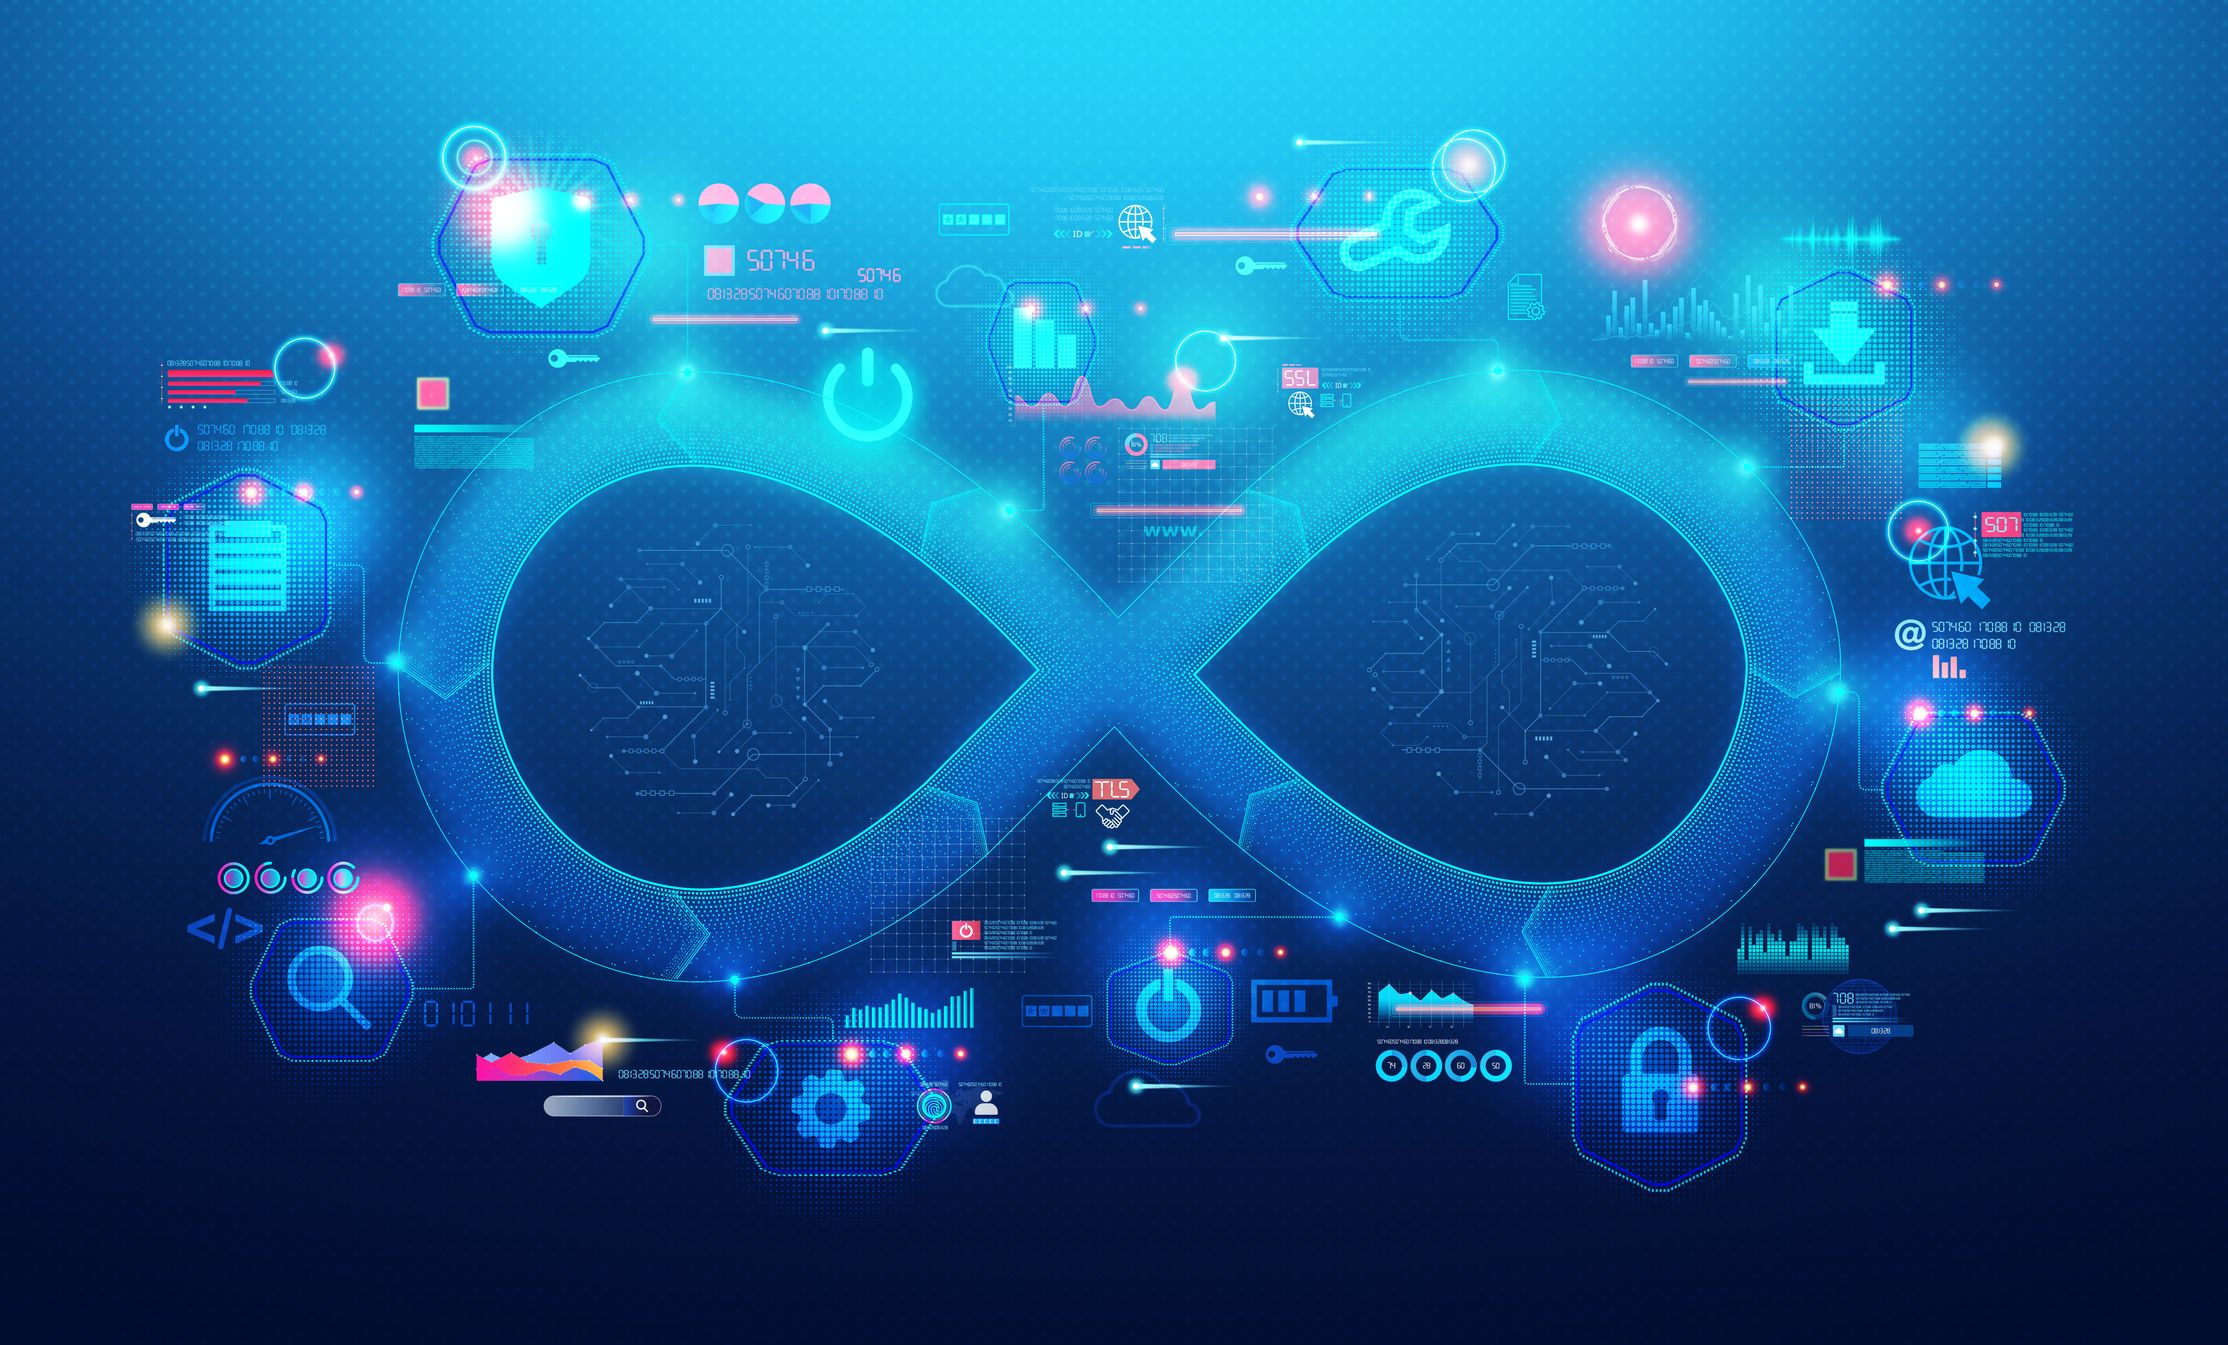 An infinity symbol covered in tech imagery